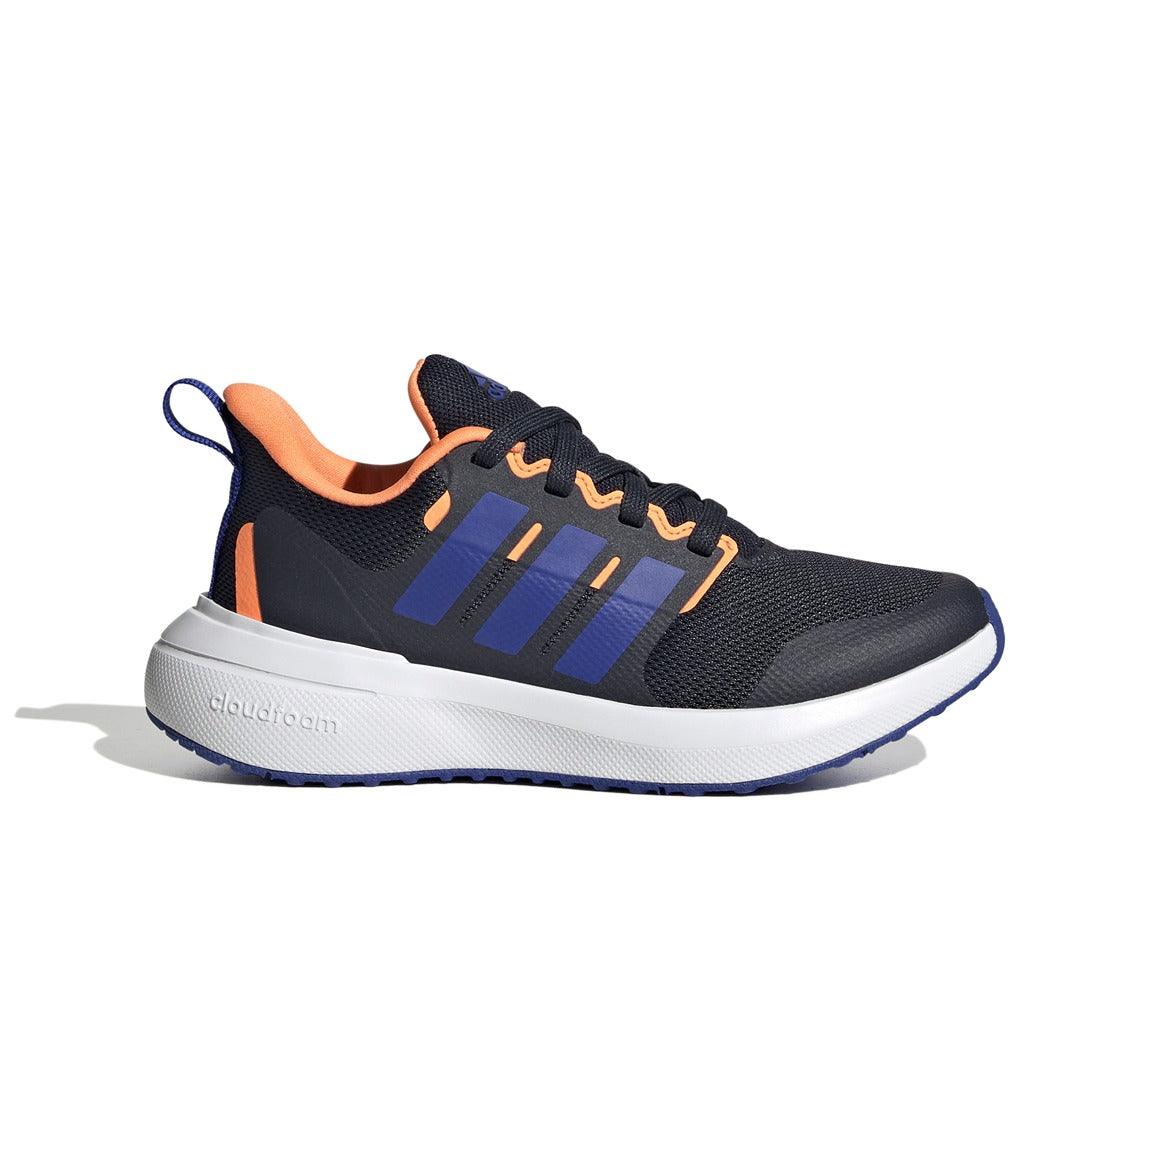 FortaRun 2.0 Cloudfoam Lace Running Shoes - Youth - Sports Excellence